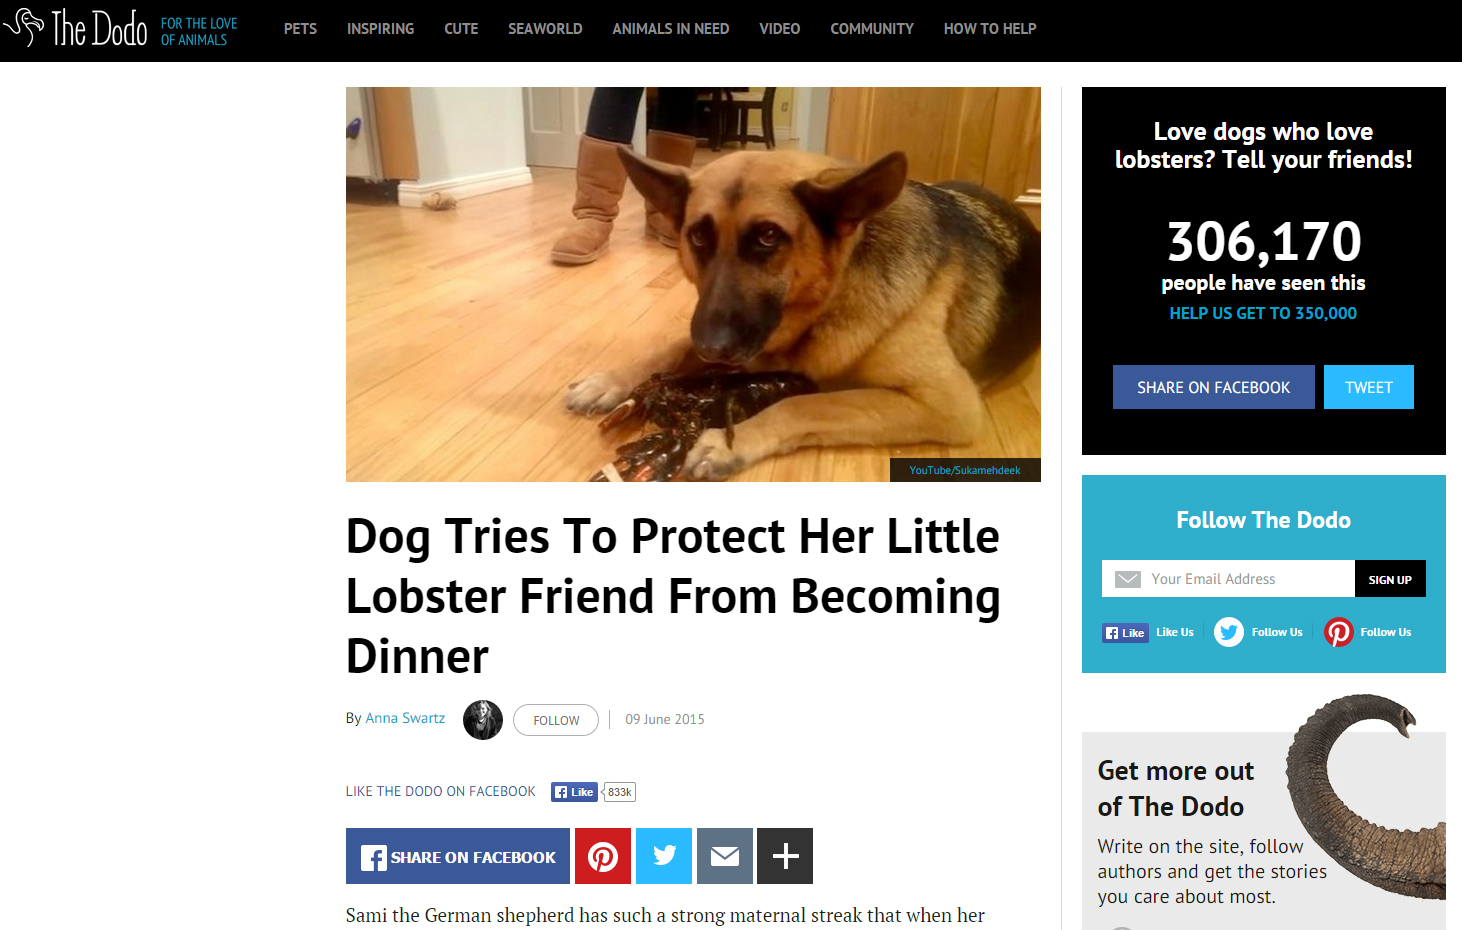 The Nihon Ken: The Dog and the Lobster